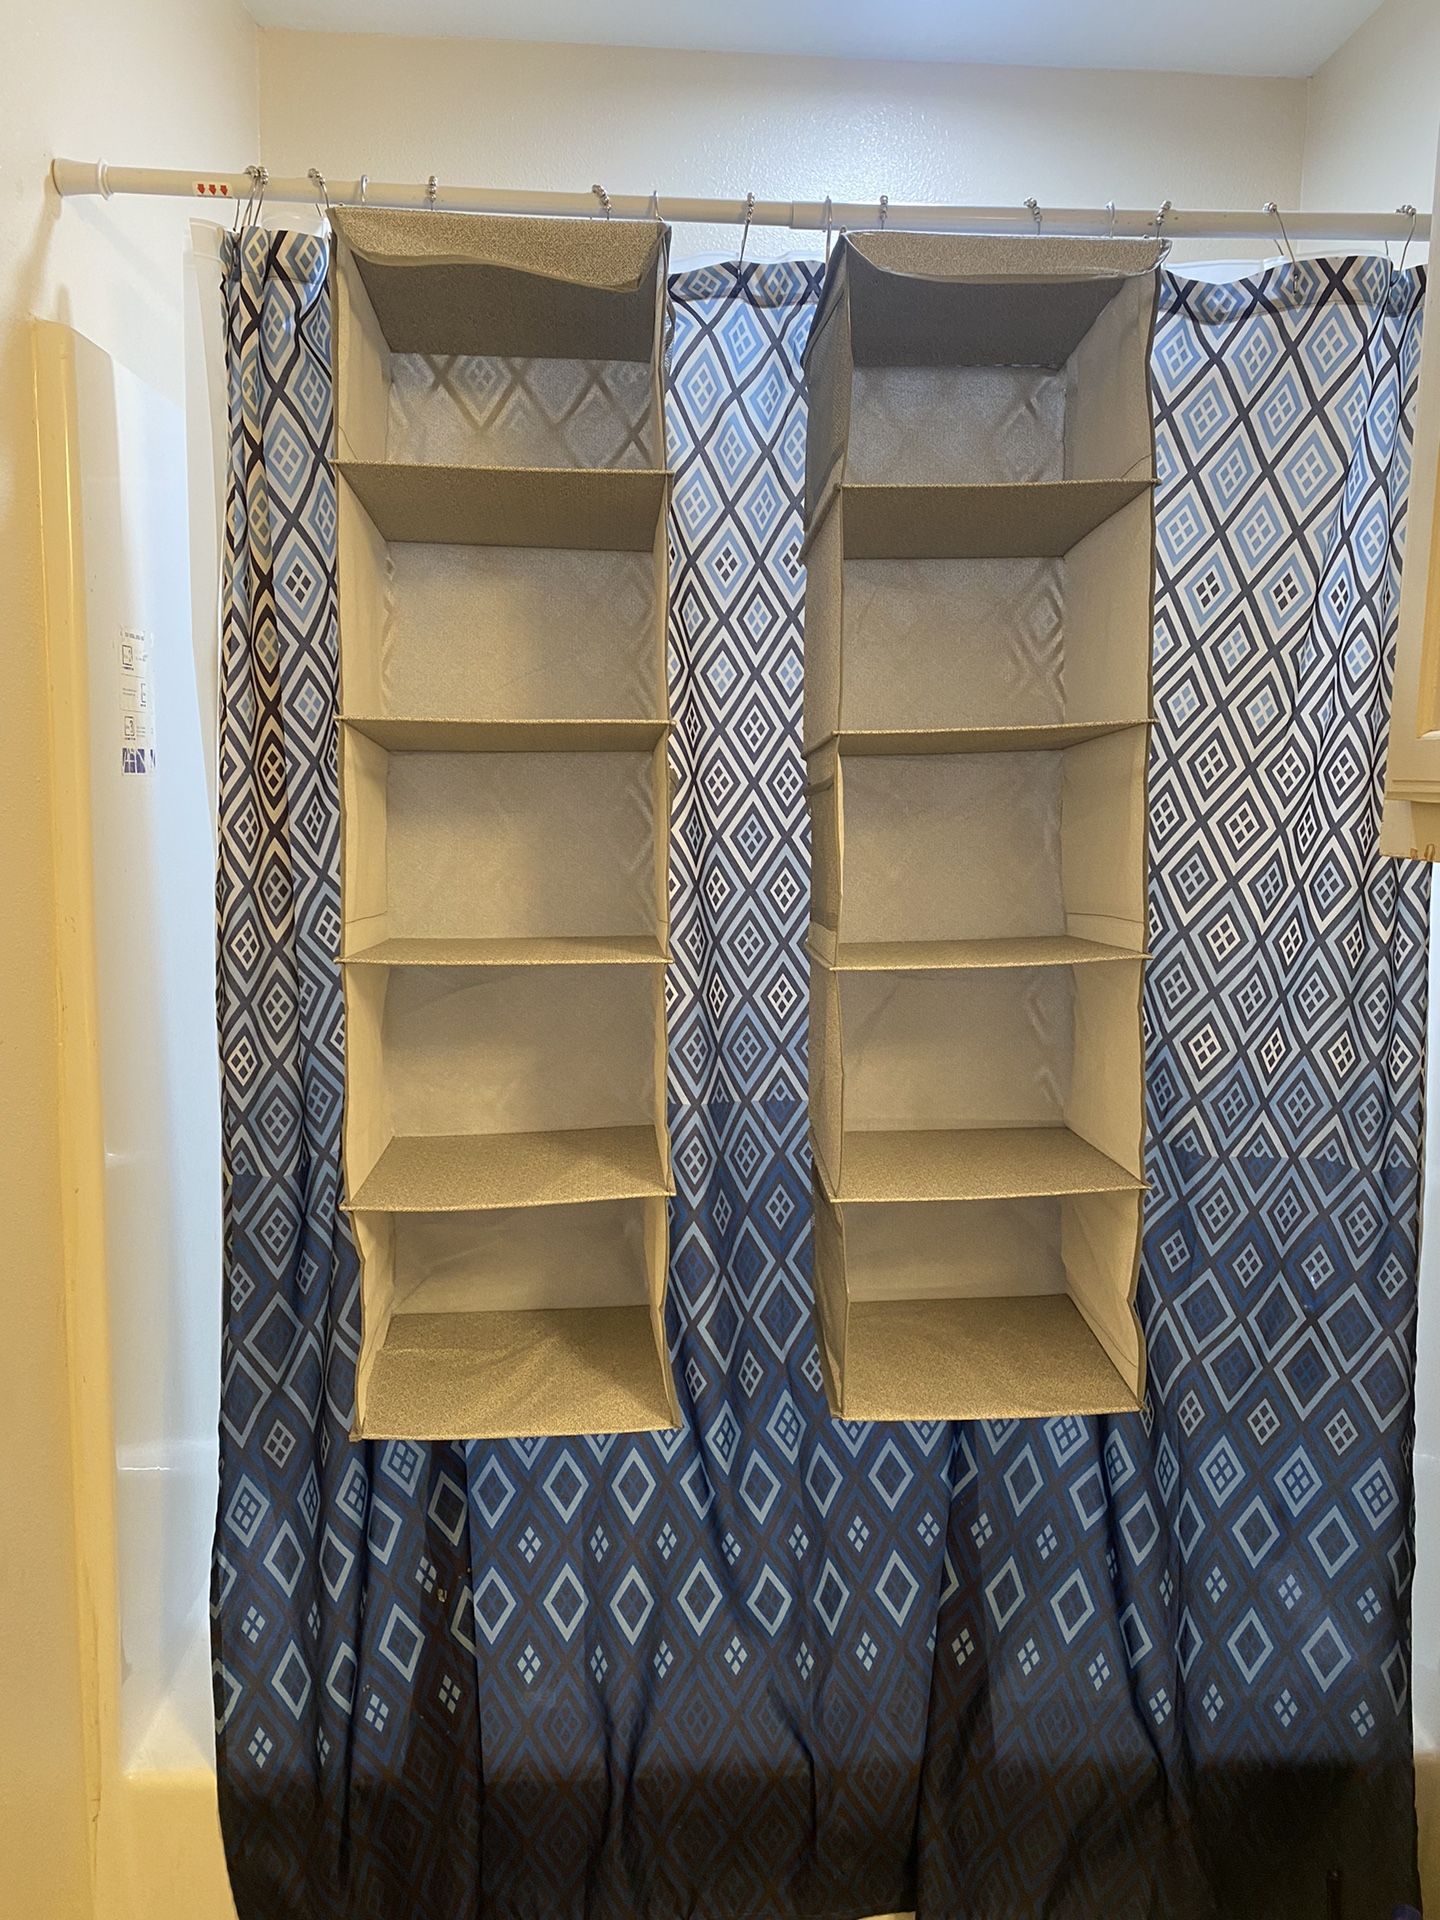 Closet Organizers &Storageboxes  for shoes